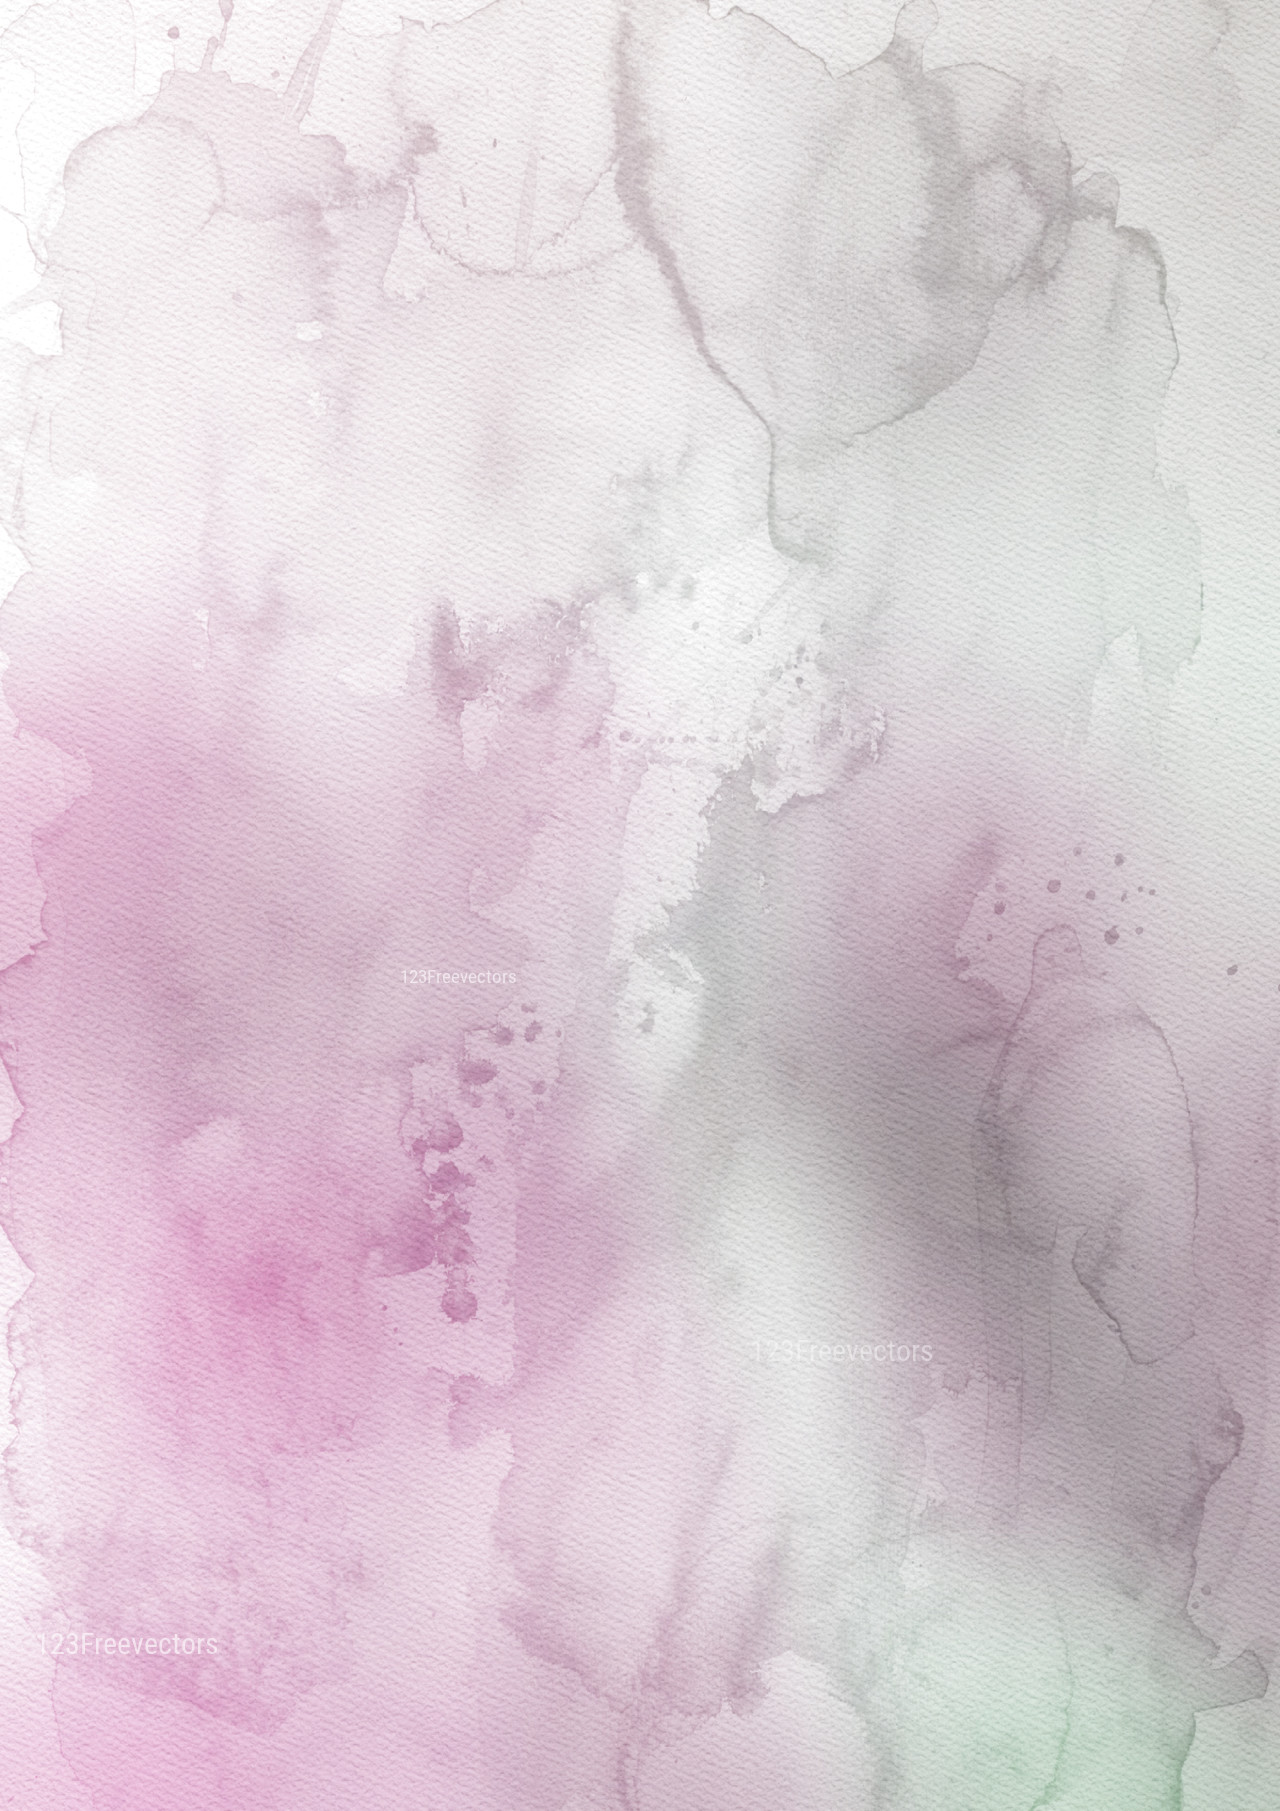 https://files.123freevectors.com/wp-content/original/170477-pink-and-grey-grunge-watercolour-texture-background.jpg